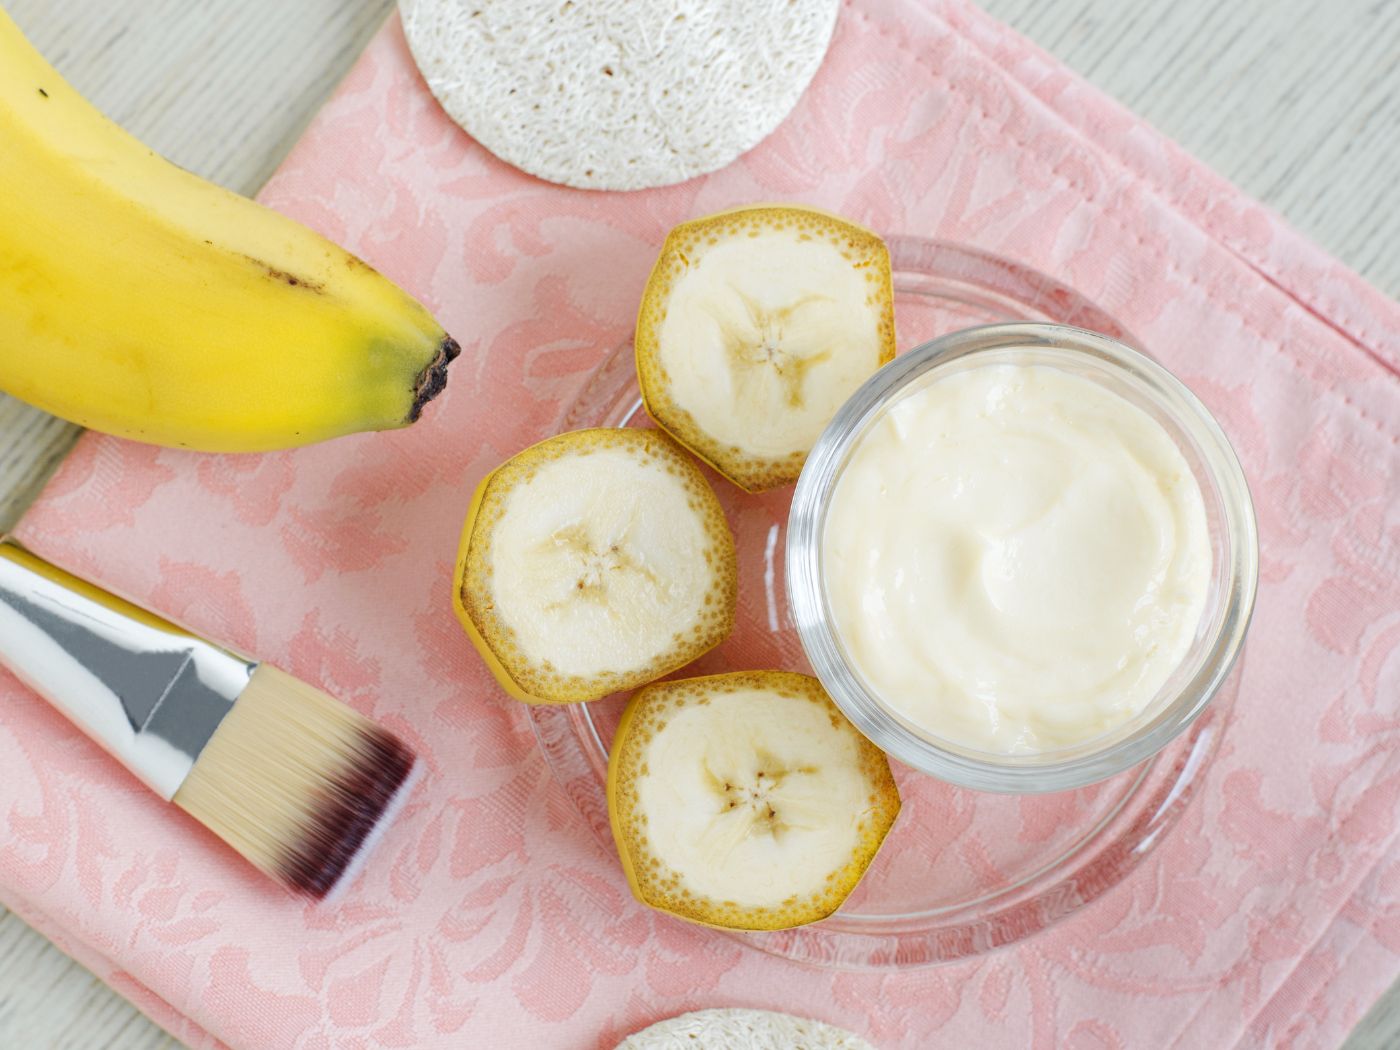 7 Banana Face Packs For Pimples And Acne